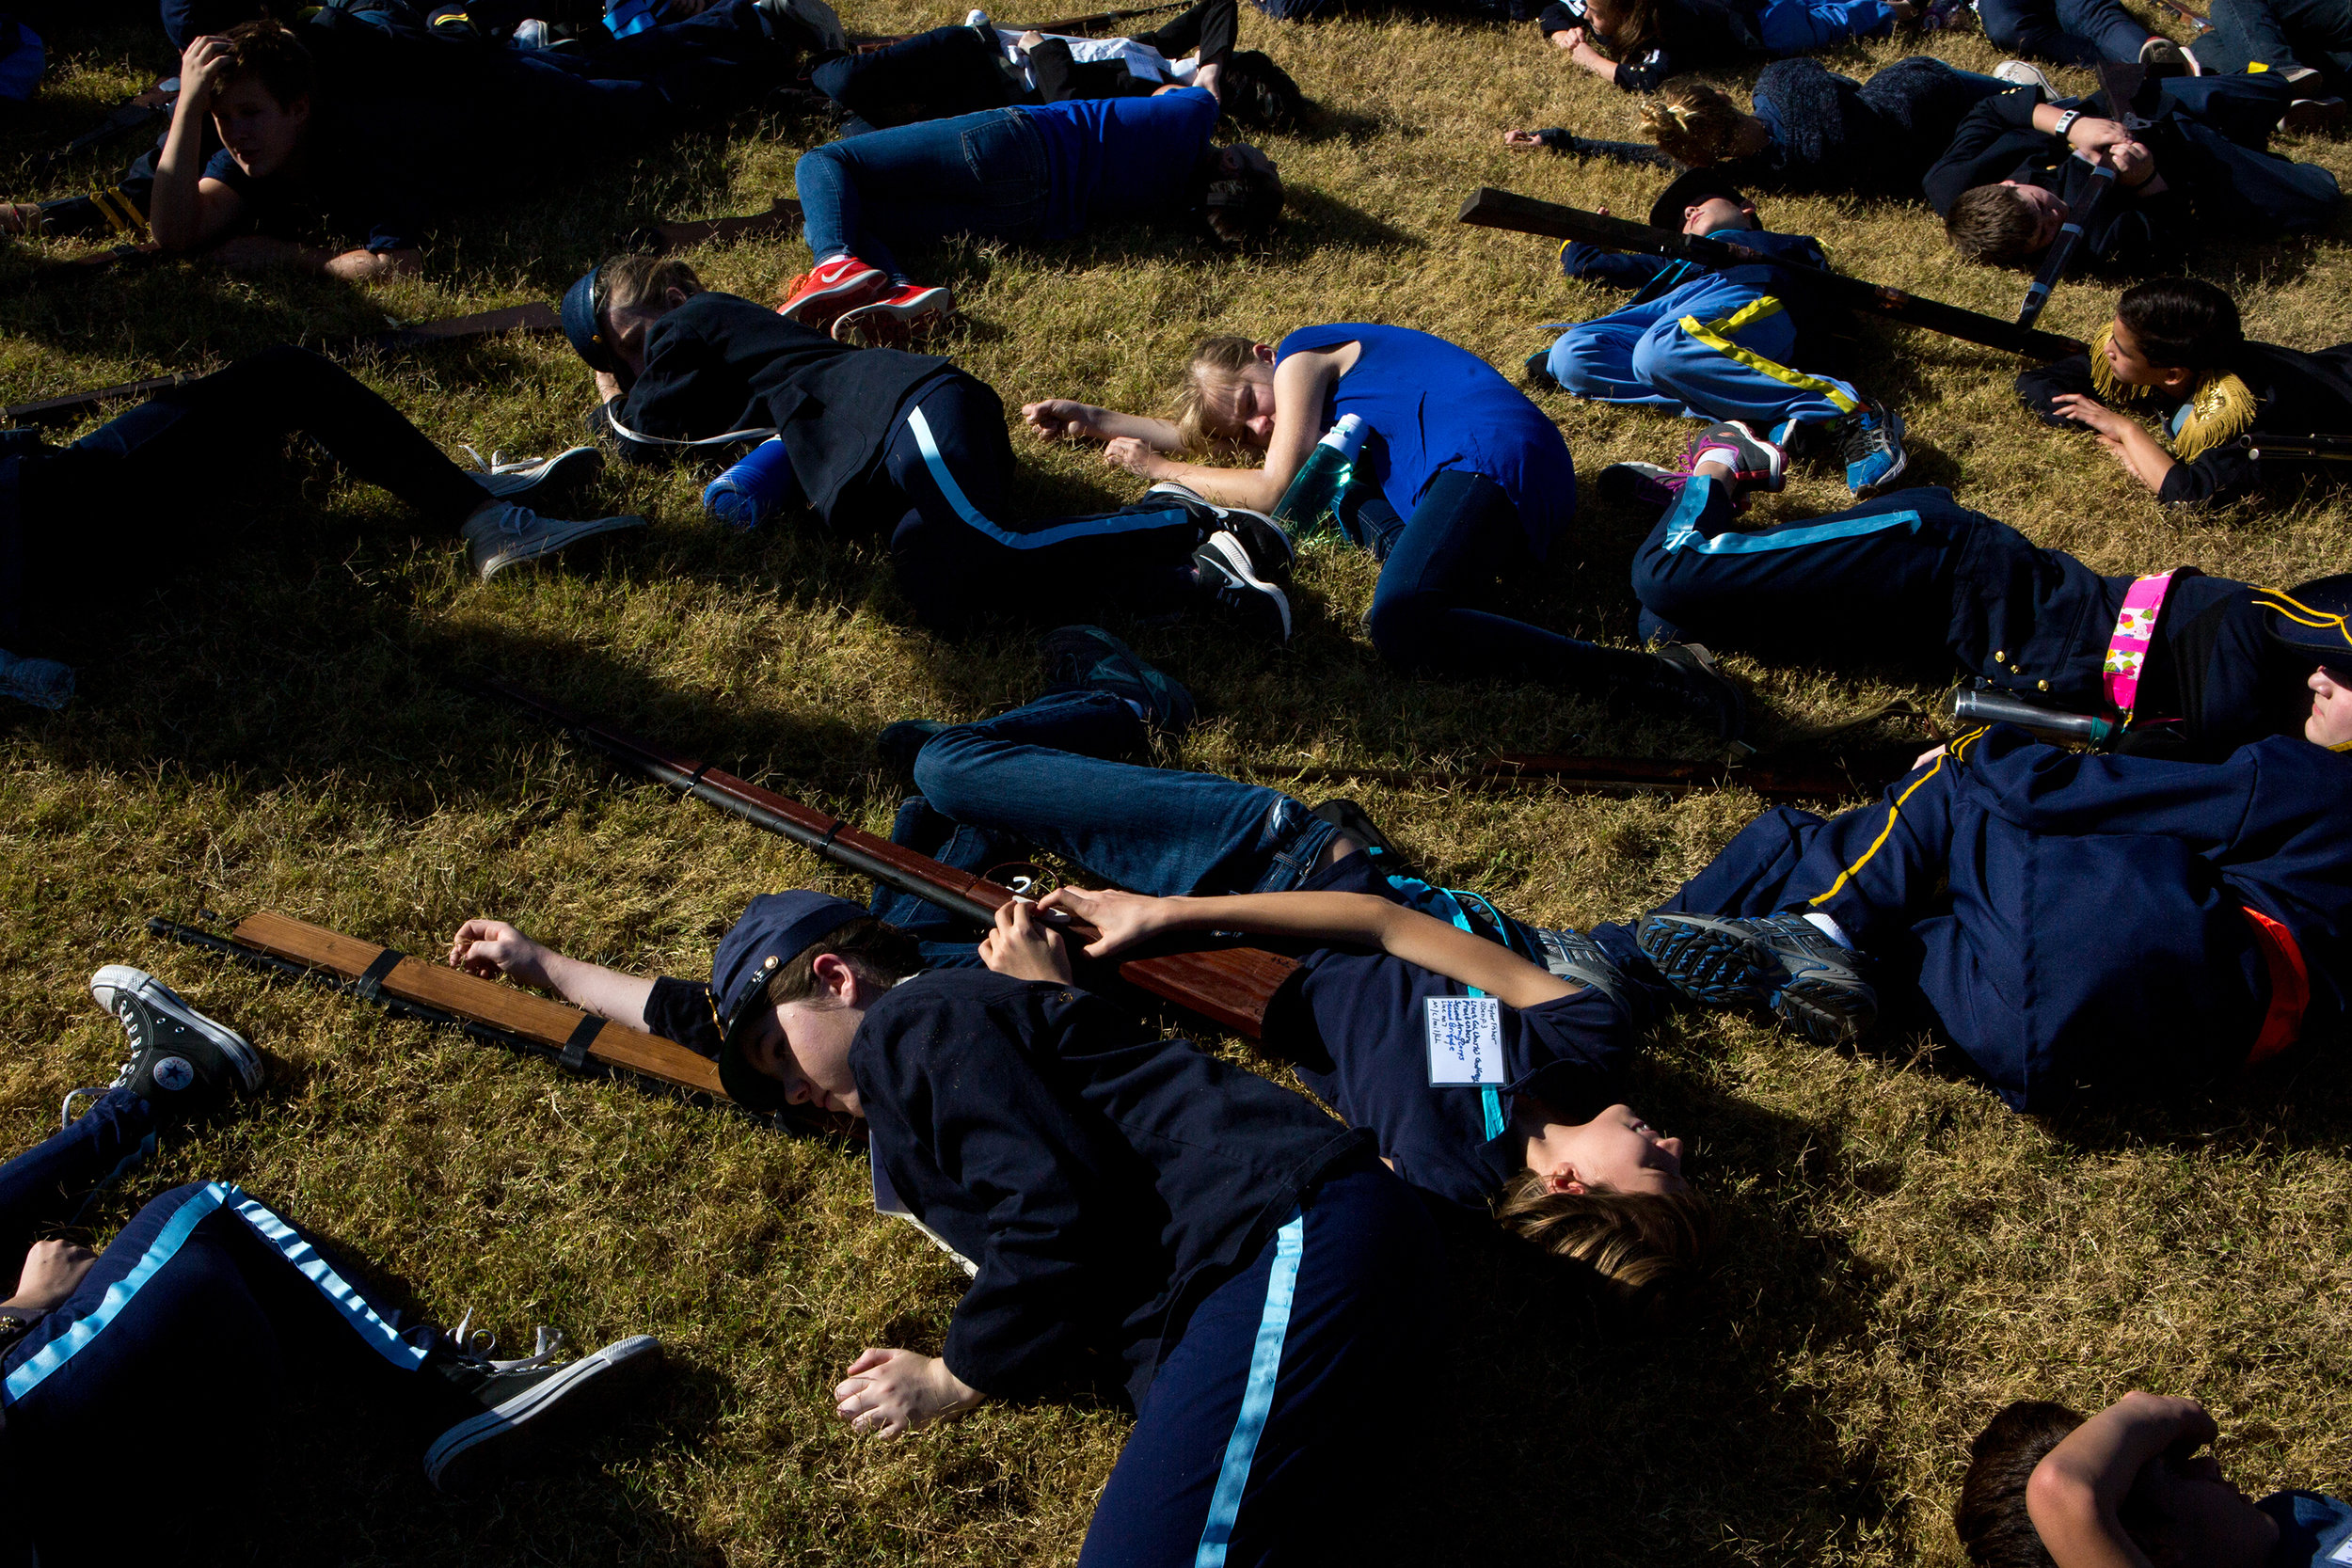  Students at Desert Shadows Middle School pretend to be dead in the grass at Sereno Park during the annual 7th-grade reenactment of the Battle of Gettysburg on Nov. 17, 2016. Lying next to them are the homemade wooden guns required for their class gr